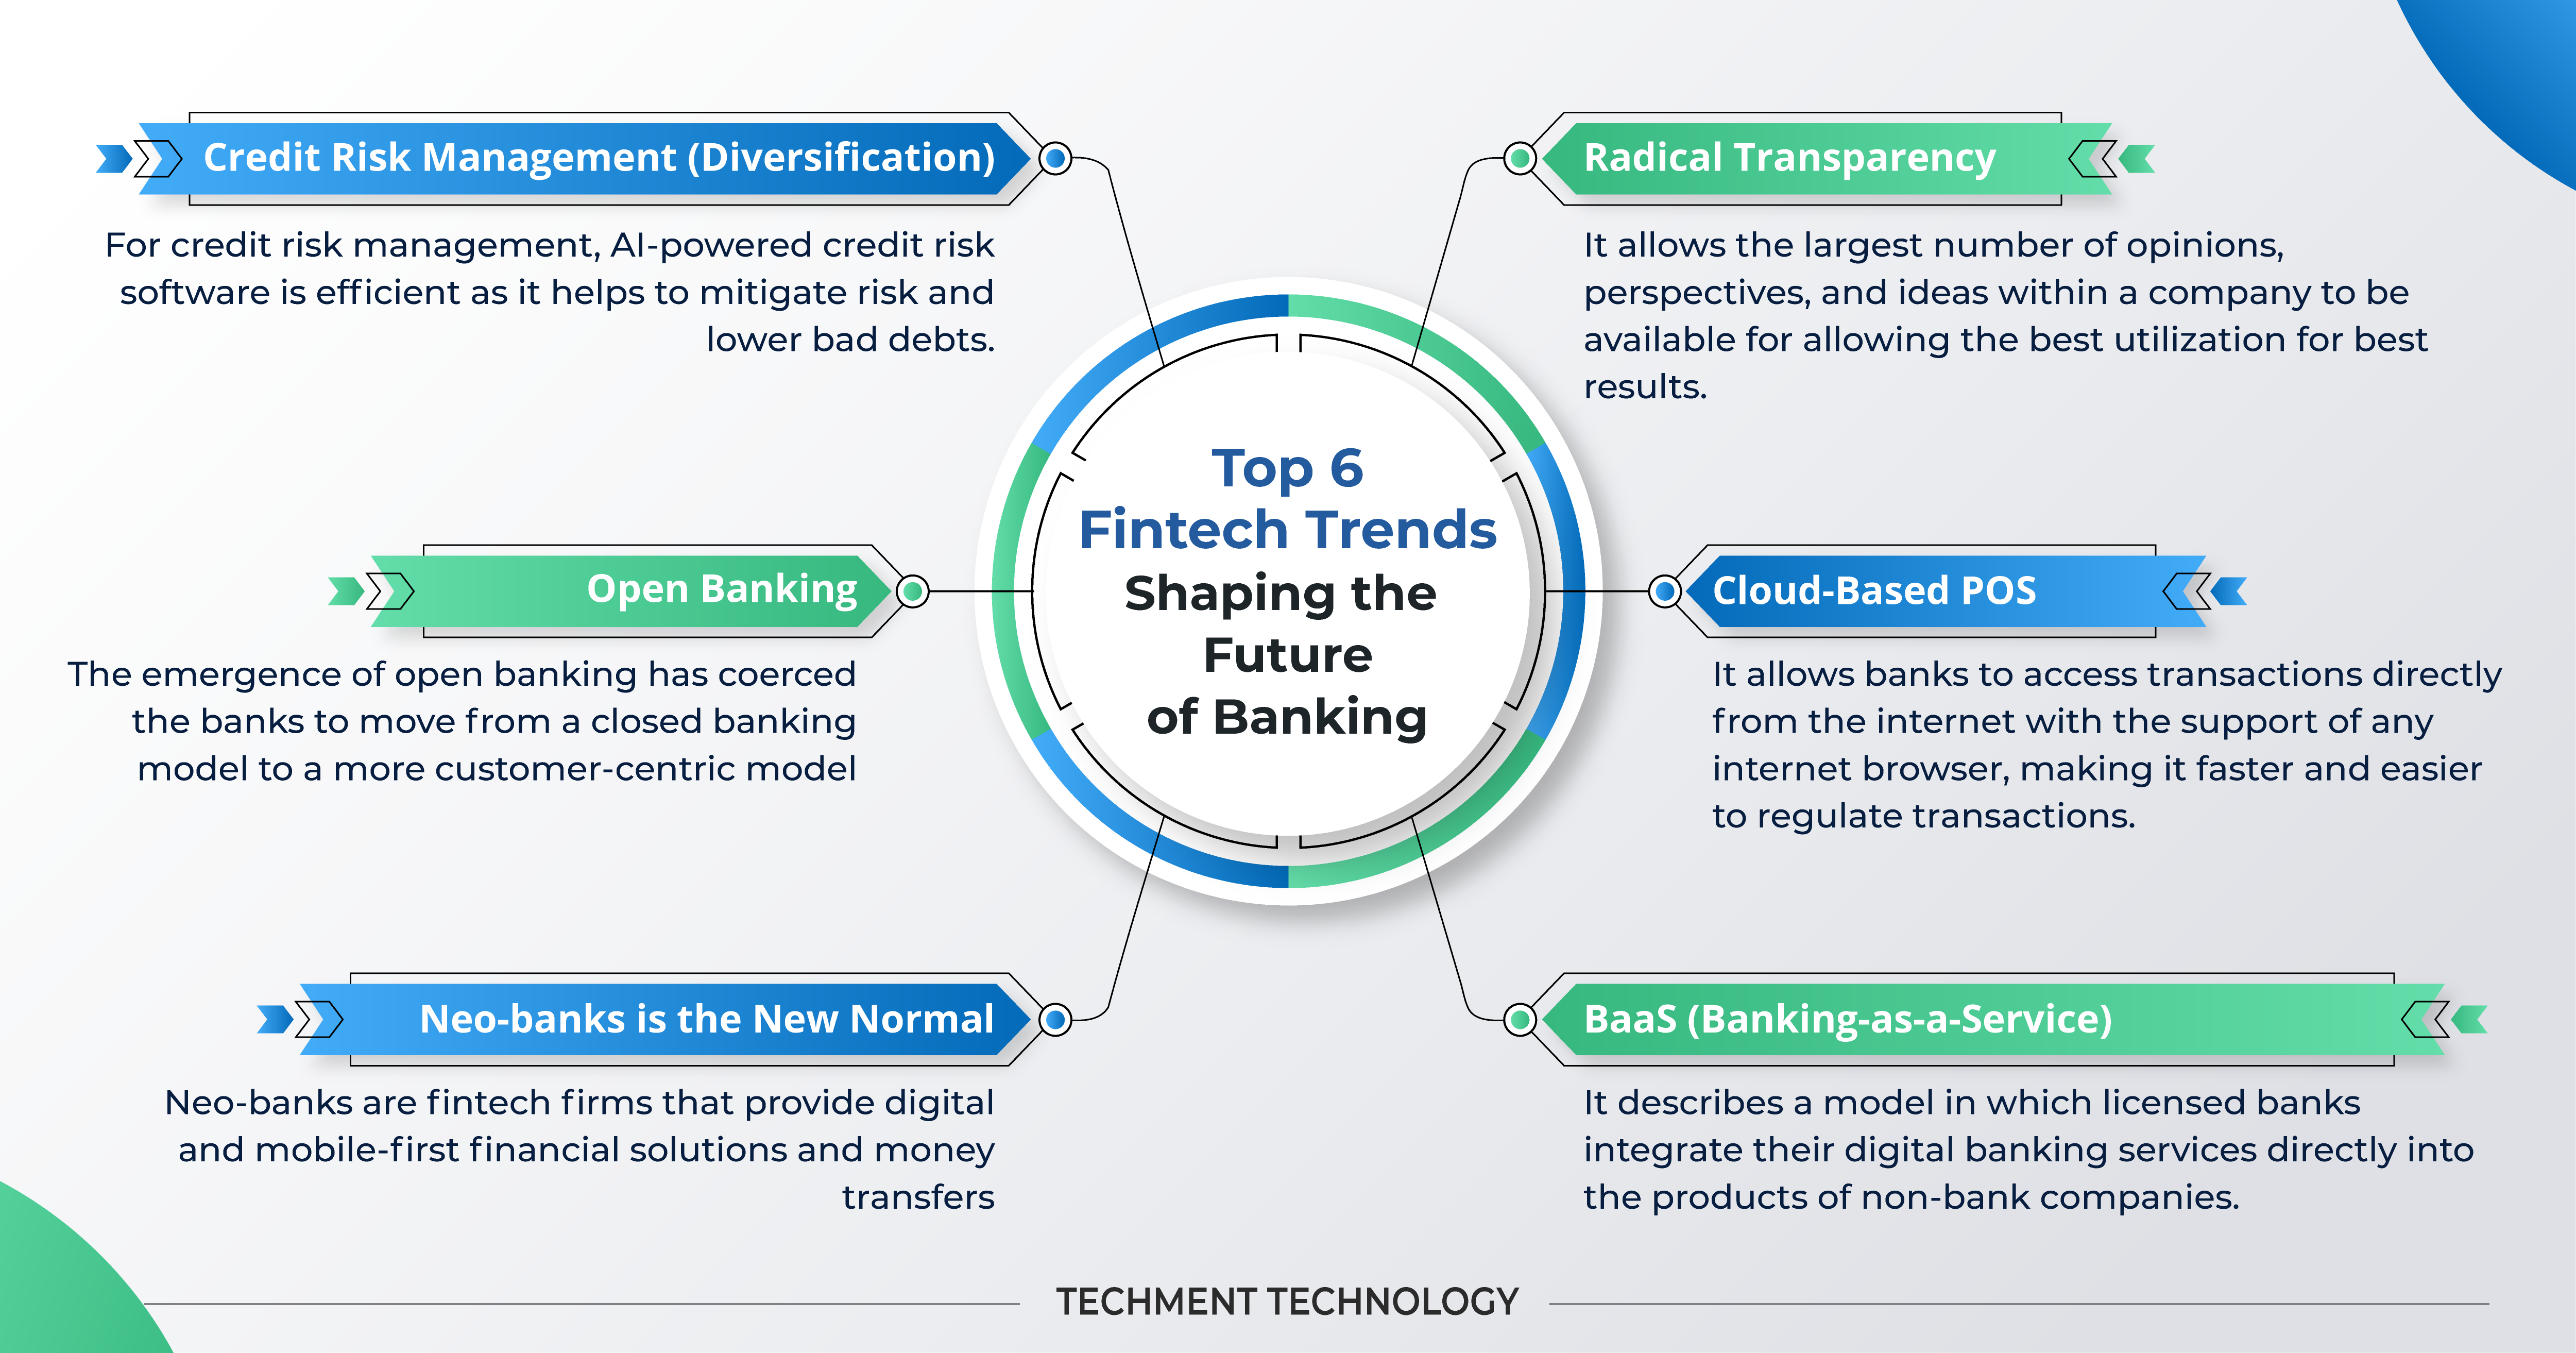  Top 6 Fintech Trends Shaping the Future of Banking 